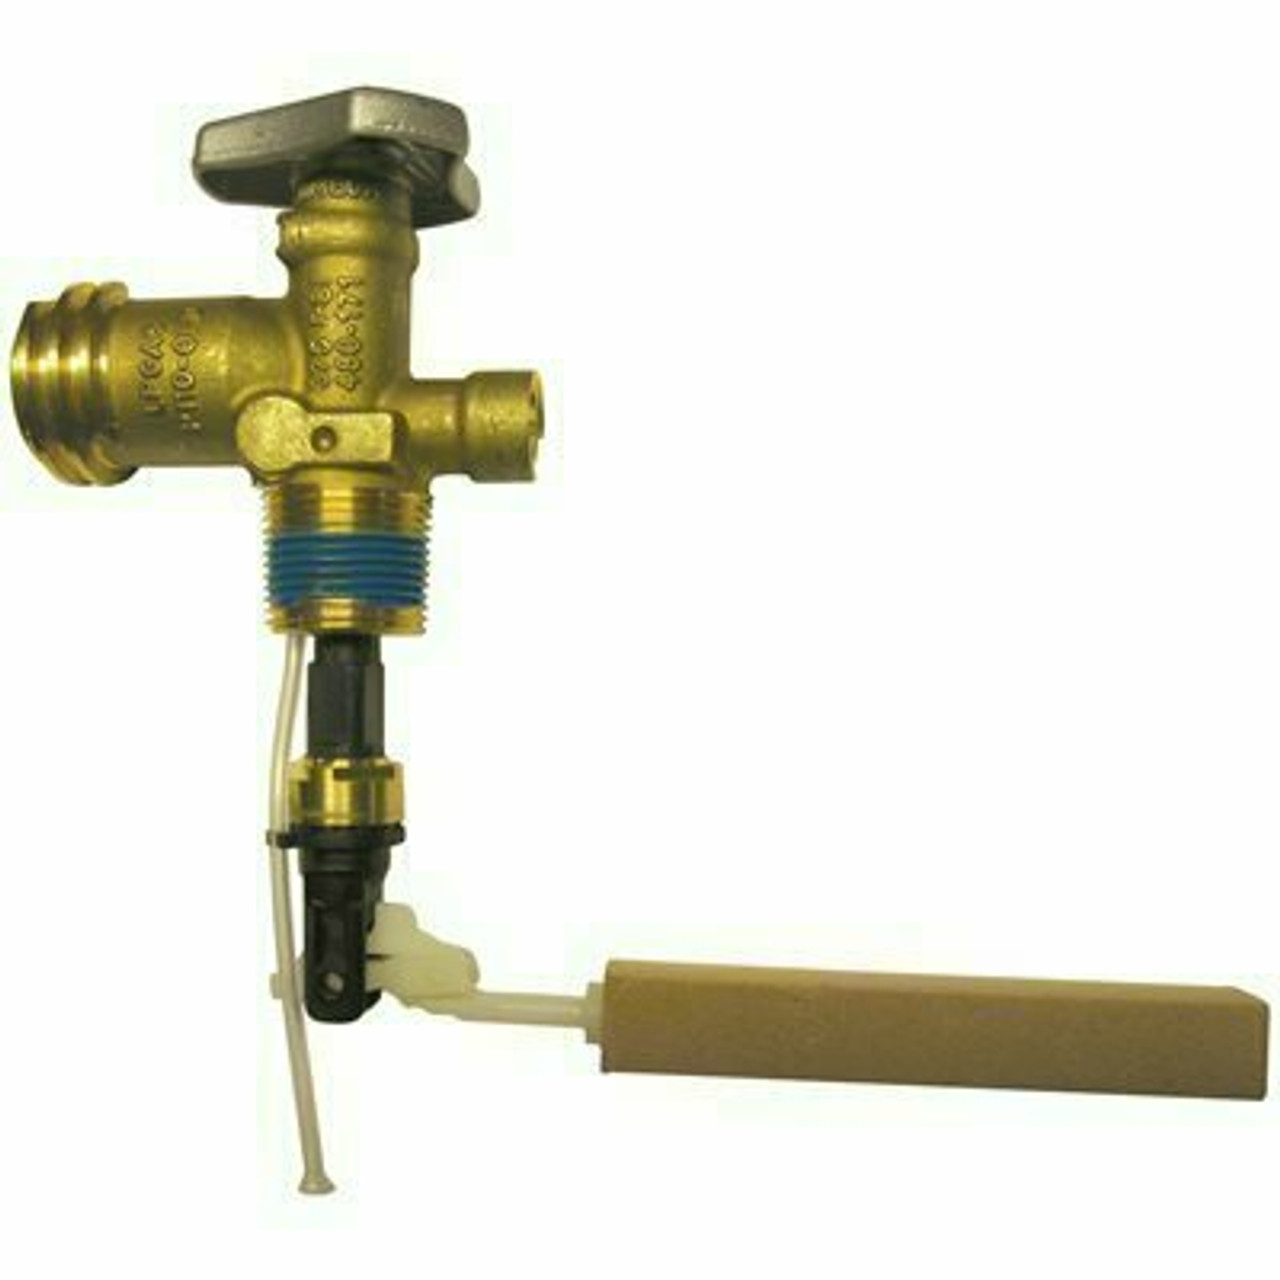 Cavagna 6.4 In. Type 1 Acme 30 Lb. Cylinder Valve With Overfill Prevention Device